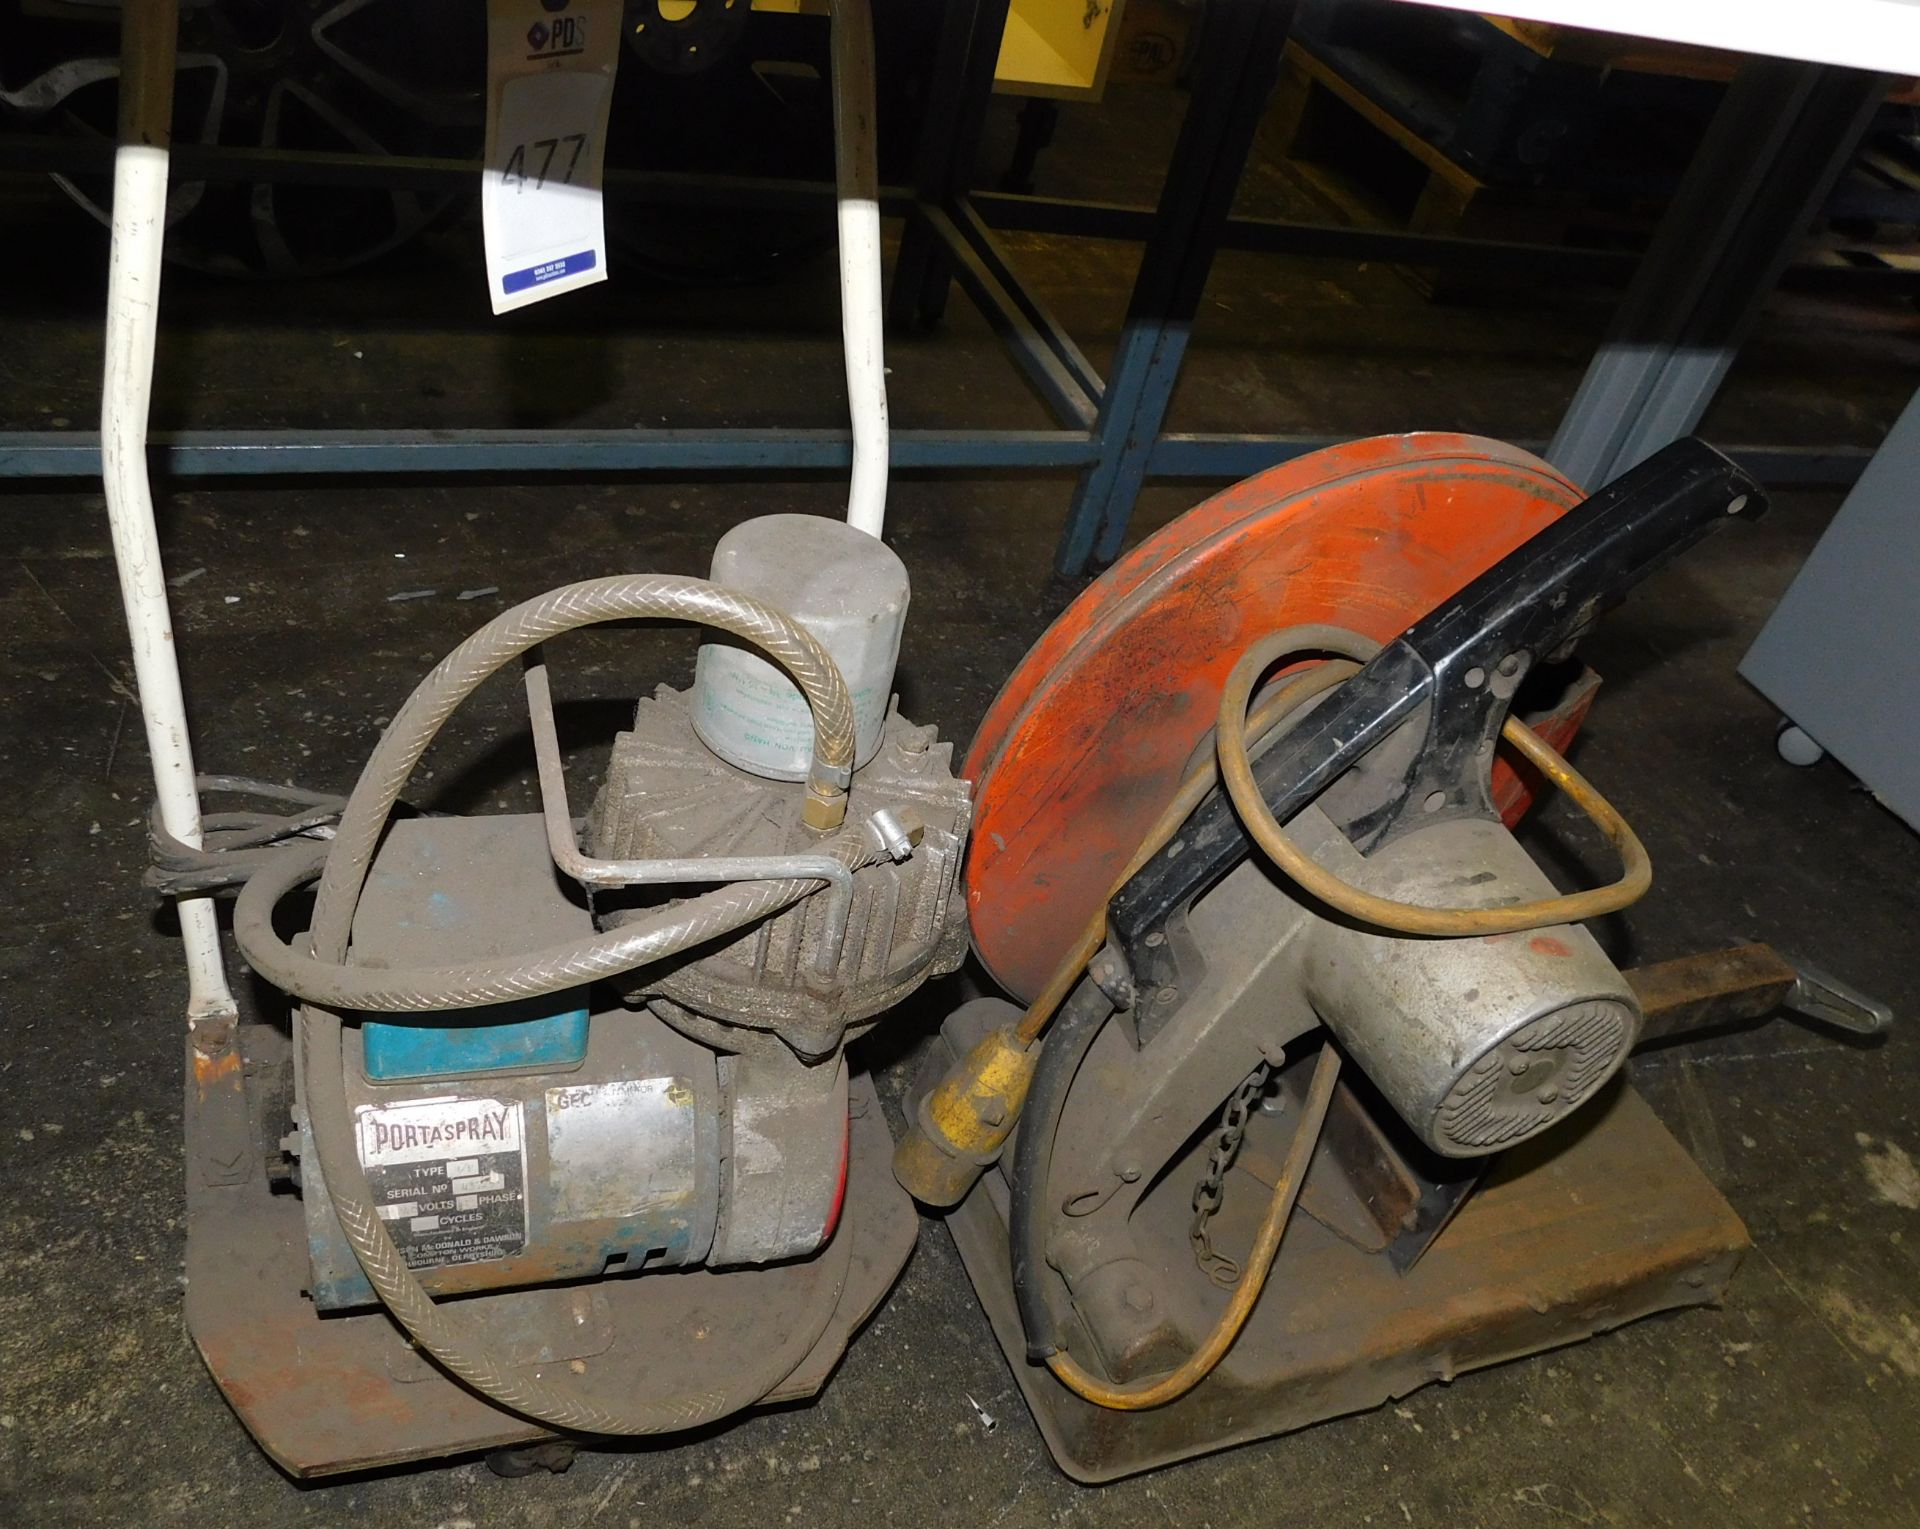 Portaspray H-F & Cut Off Saw (Location Stockport. Please Refer to General Notes)